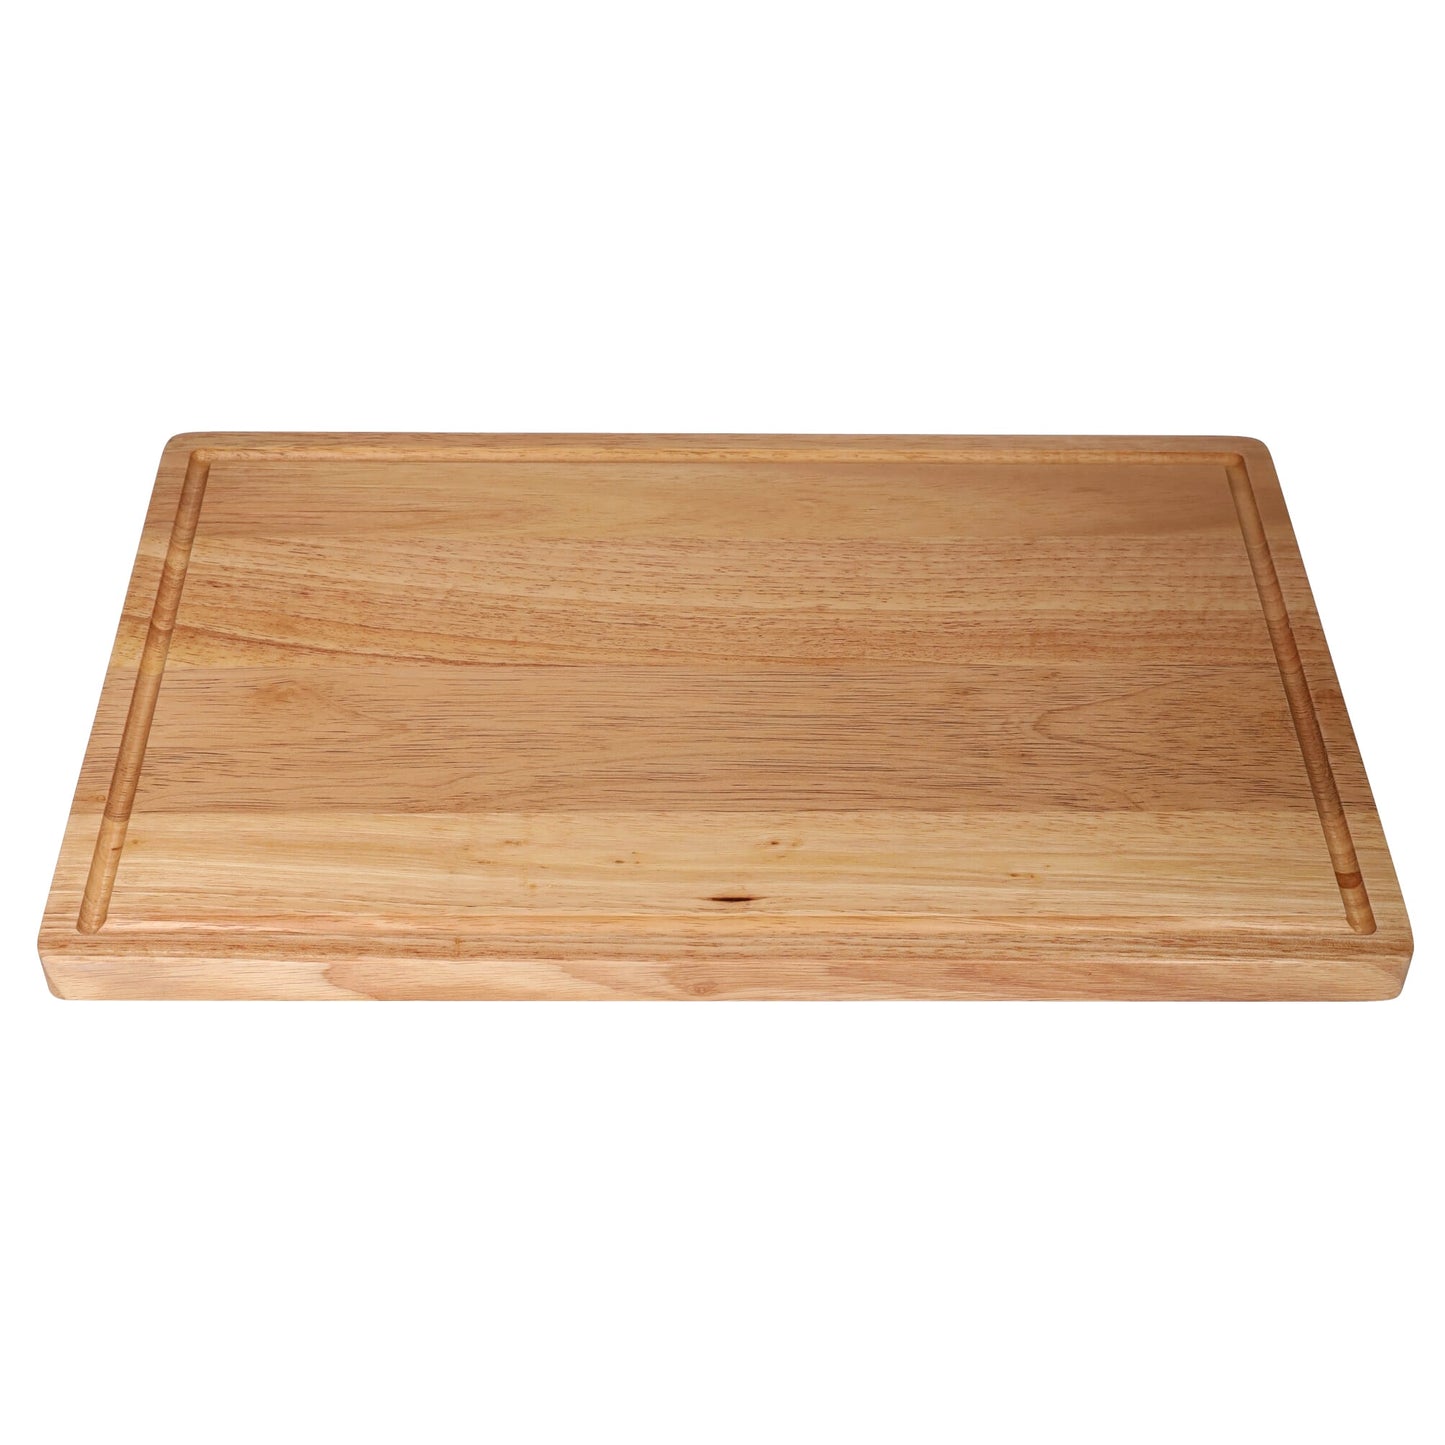 Chef Remi Wood Chopping Board with Juice Canal - 40 x 25cm Christmas Gift